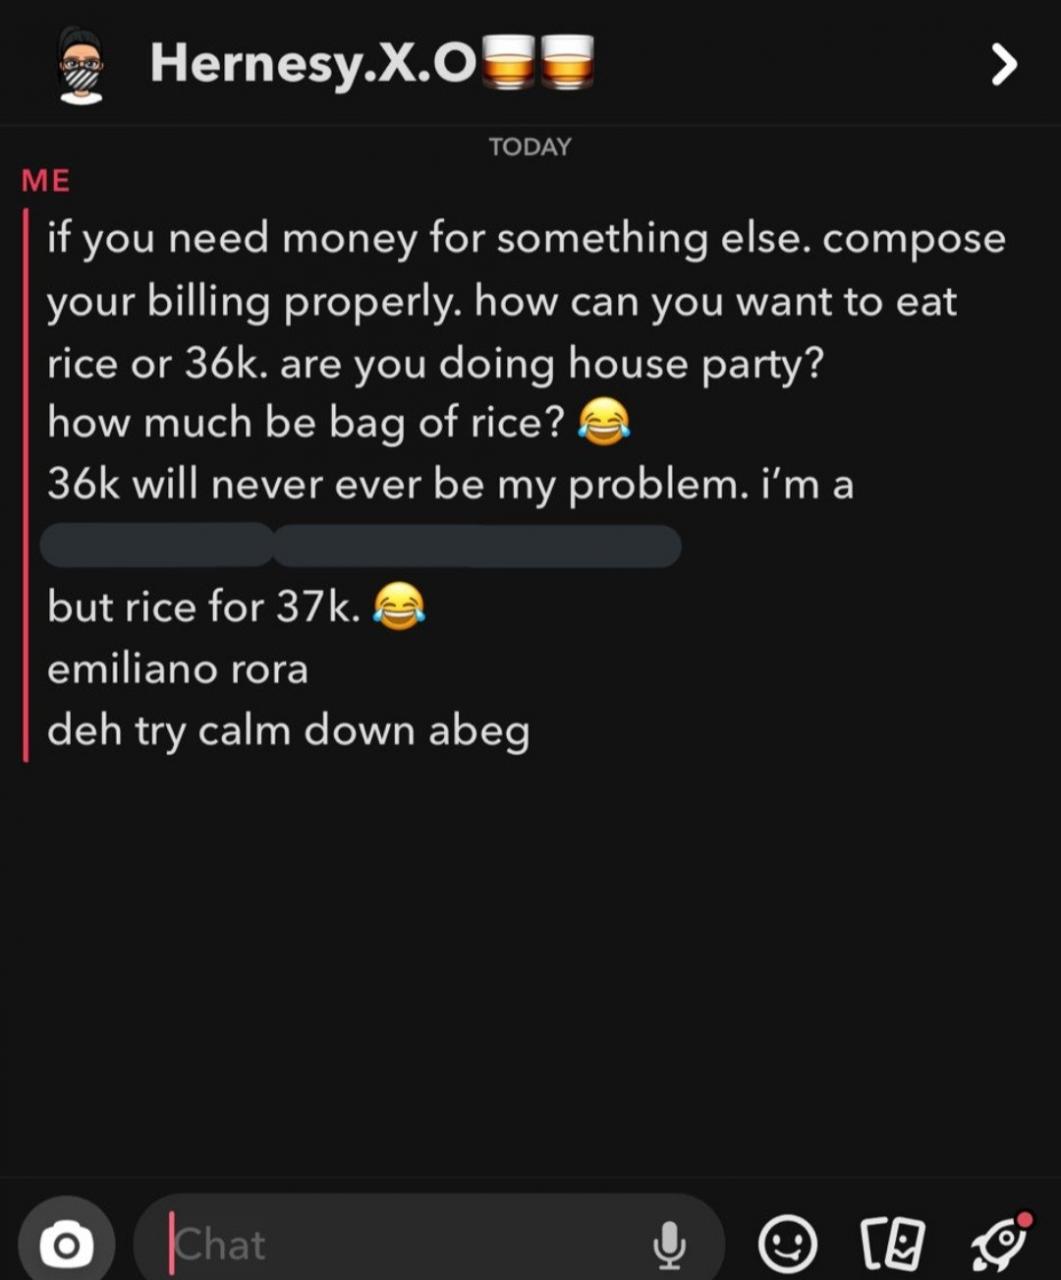 Man calls out woman who requested food worth 35K on his dime and she responds